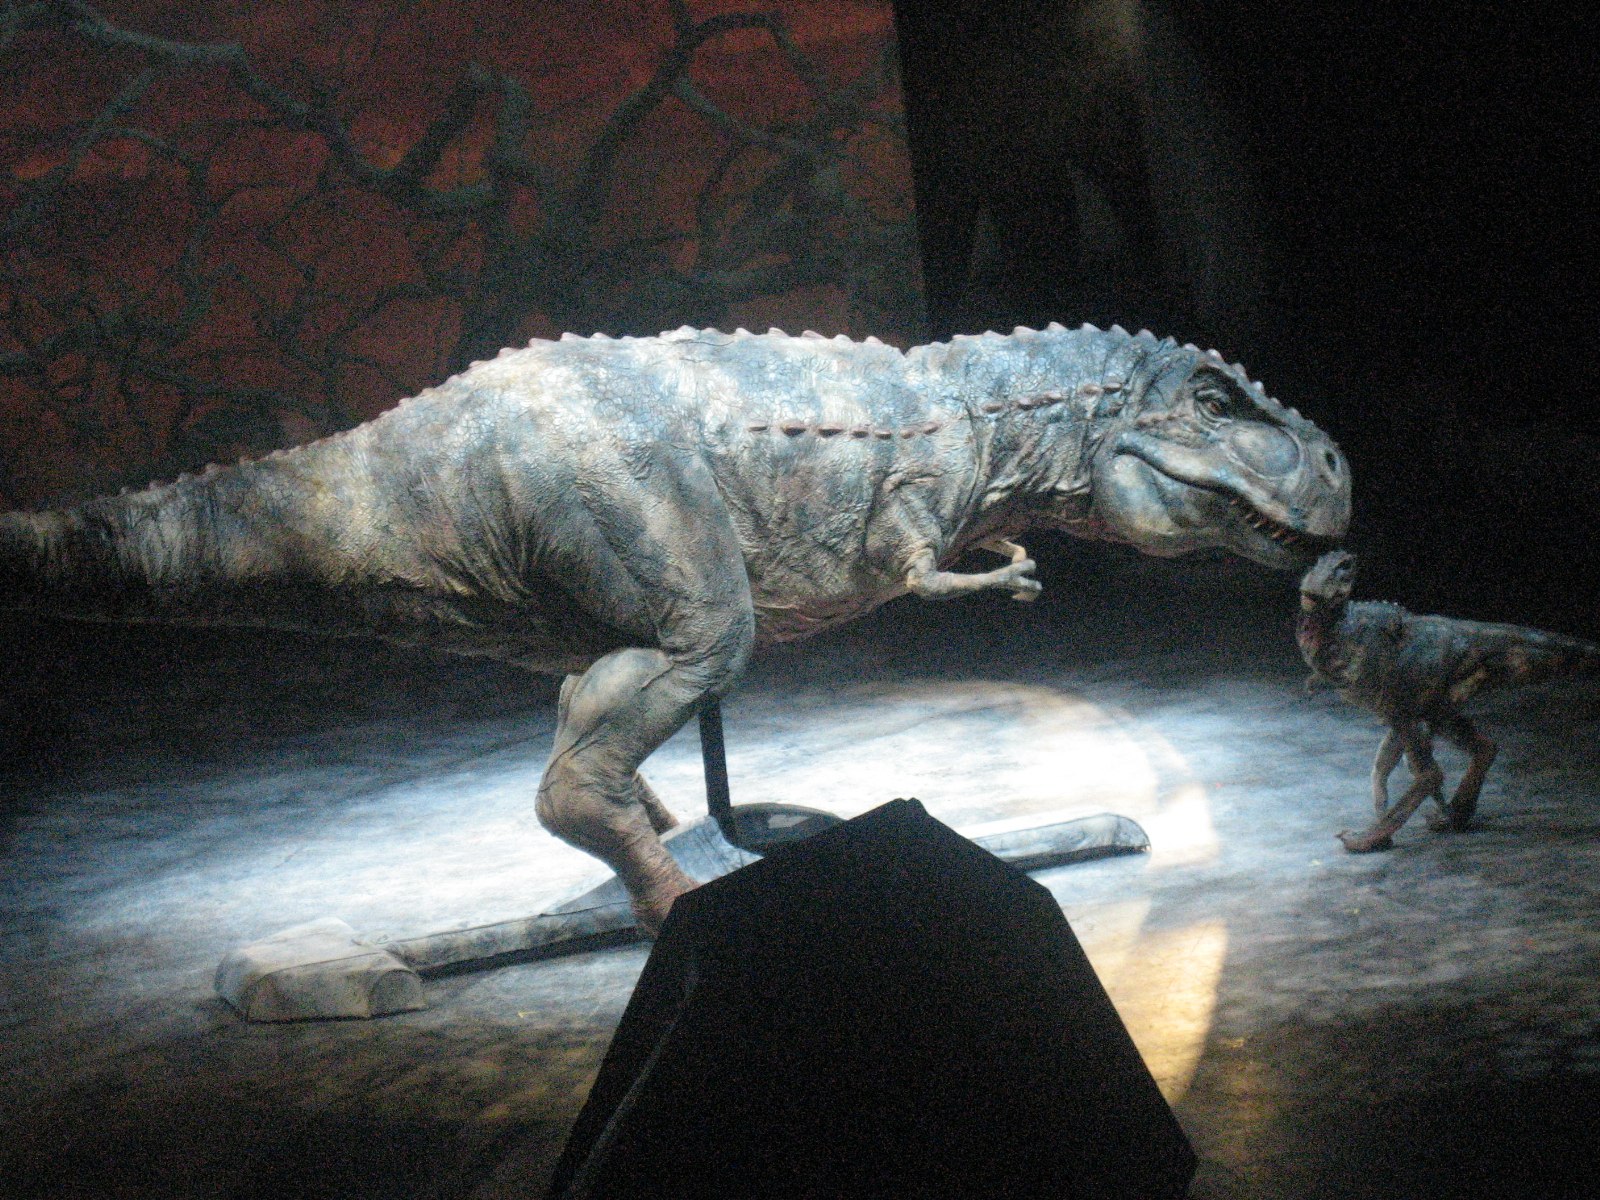 File:Walking with Dinosaurs.jpg - Wikimedia Commons